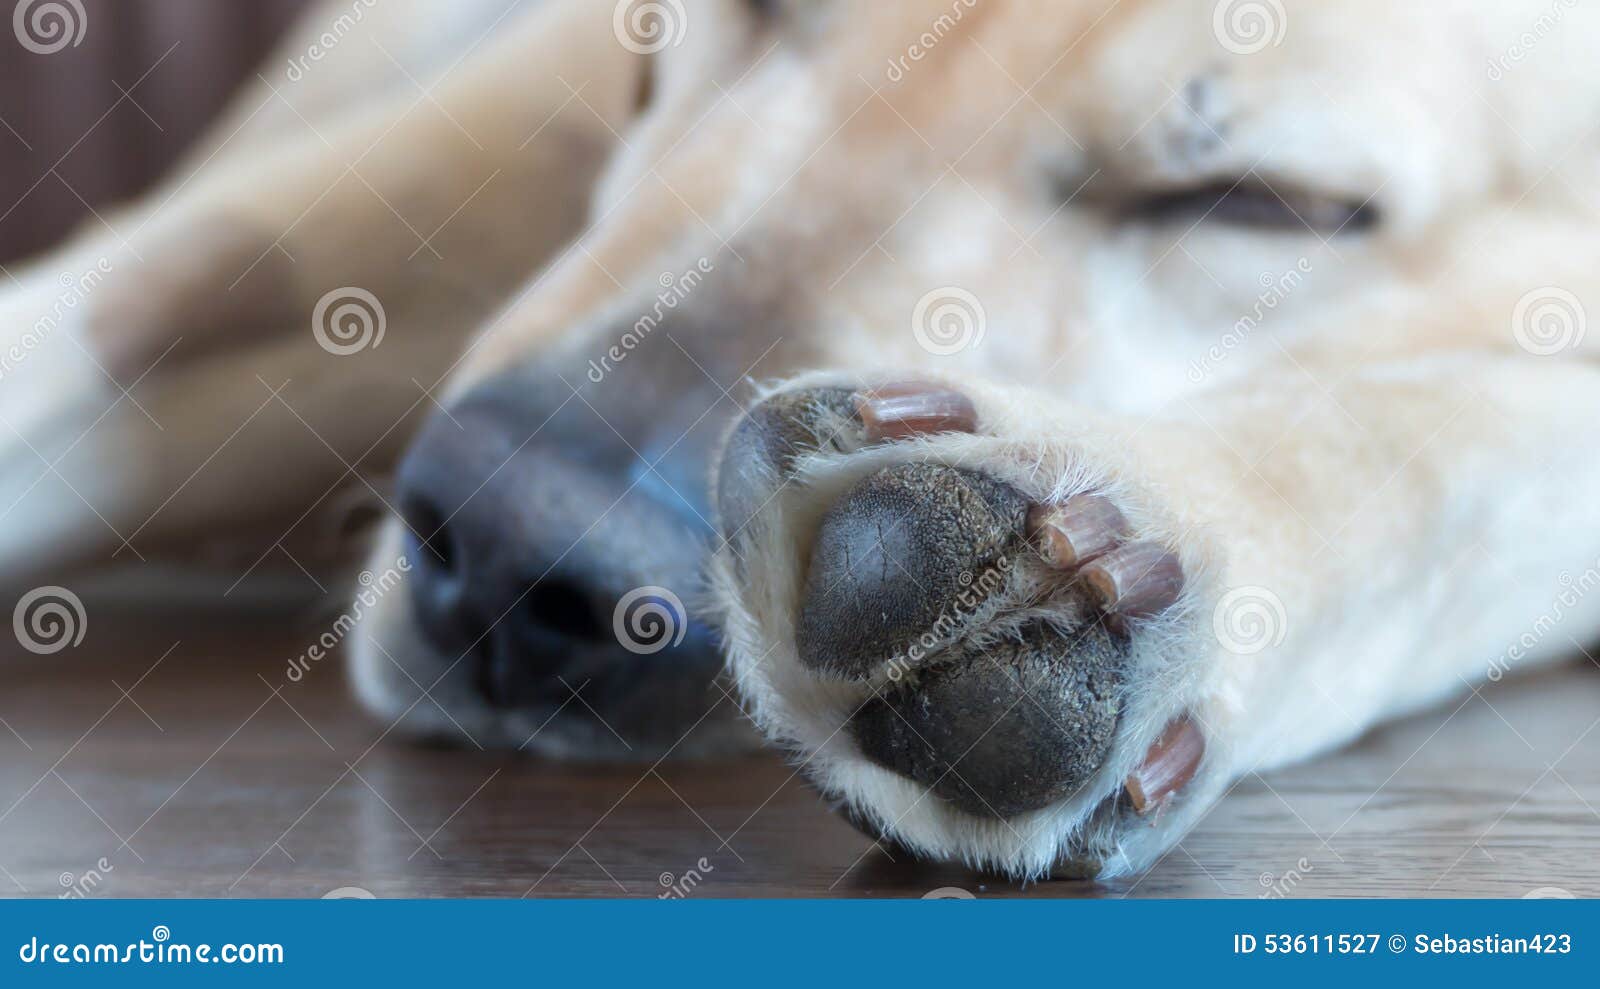 dogs paw